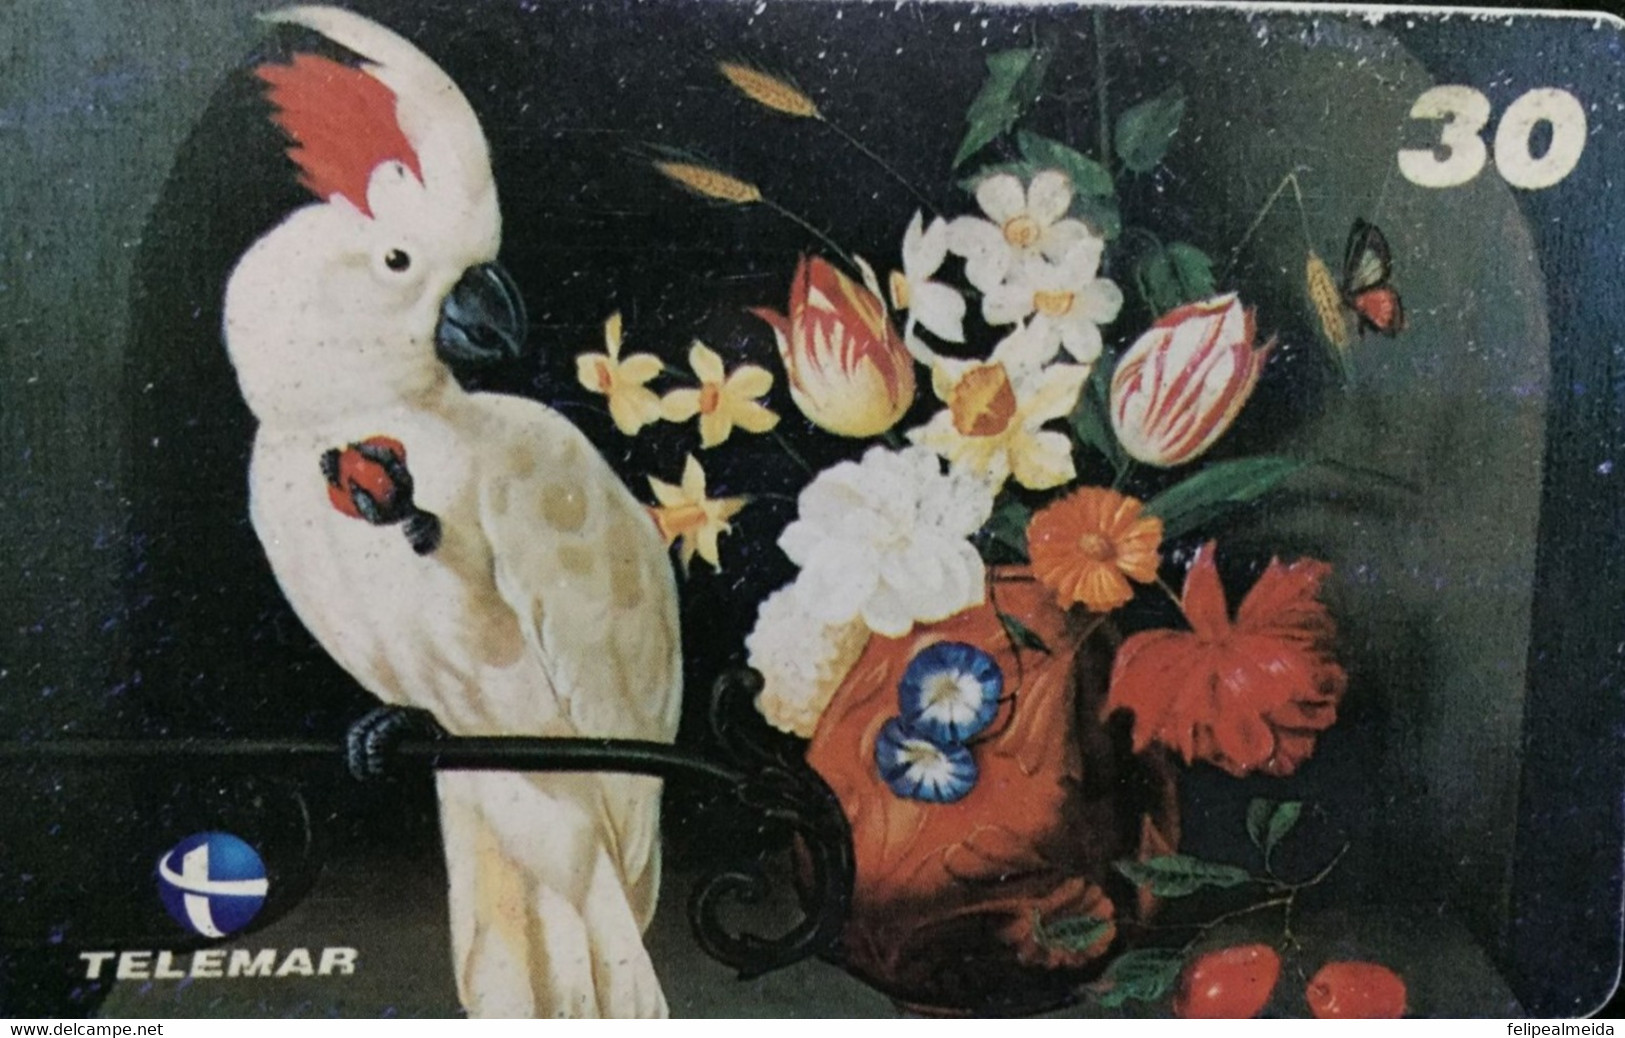 Phone Card Manufactured By Telemar In 2000 - Painting Cockatoo And Flowers - Painter Nilton Mendoça - Peinture